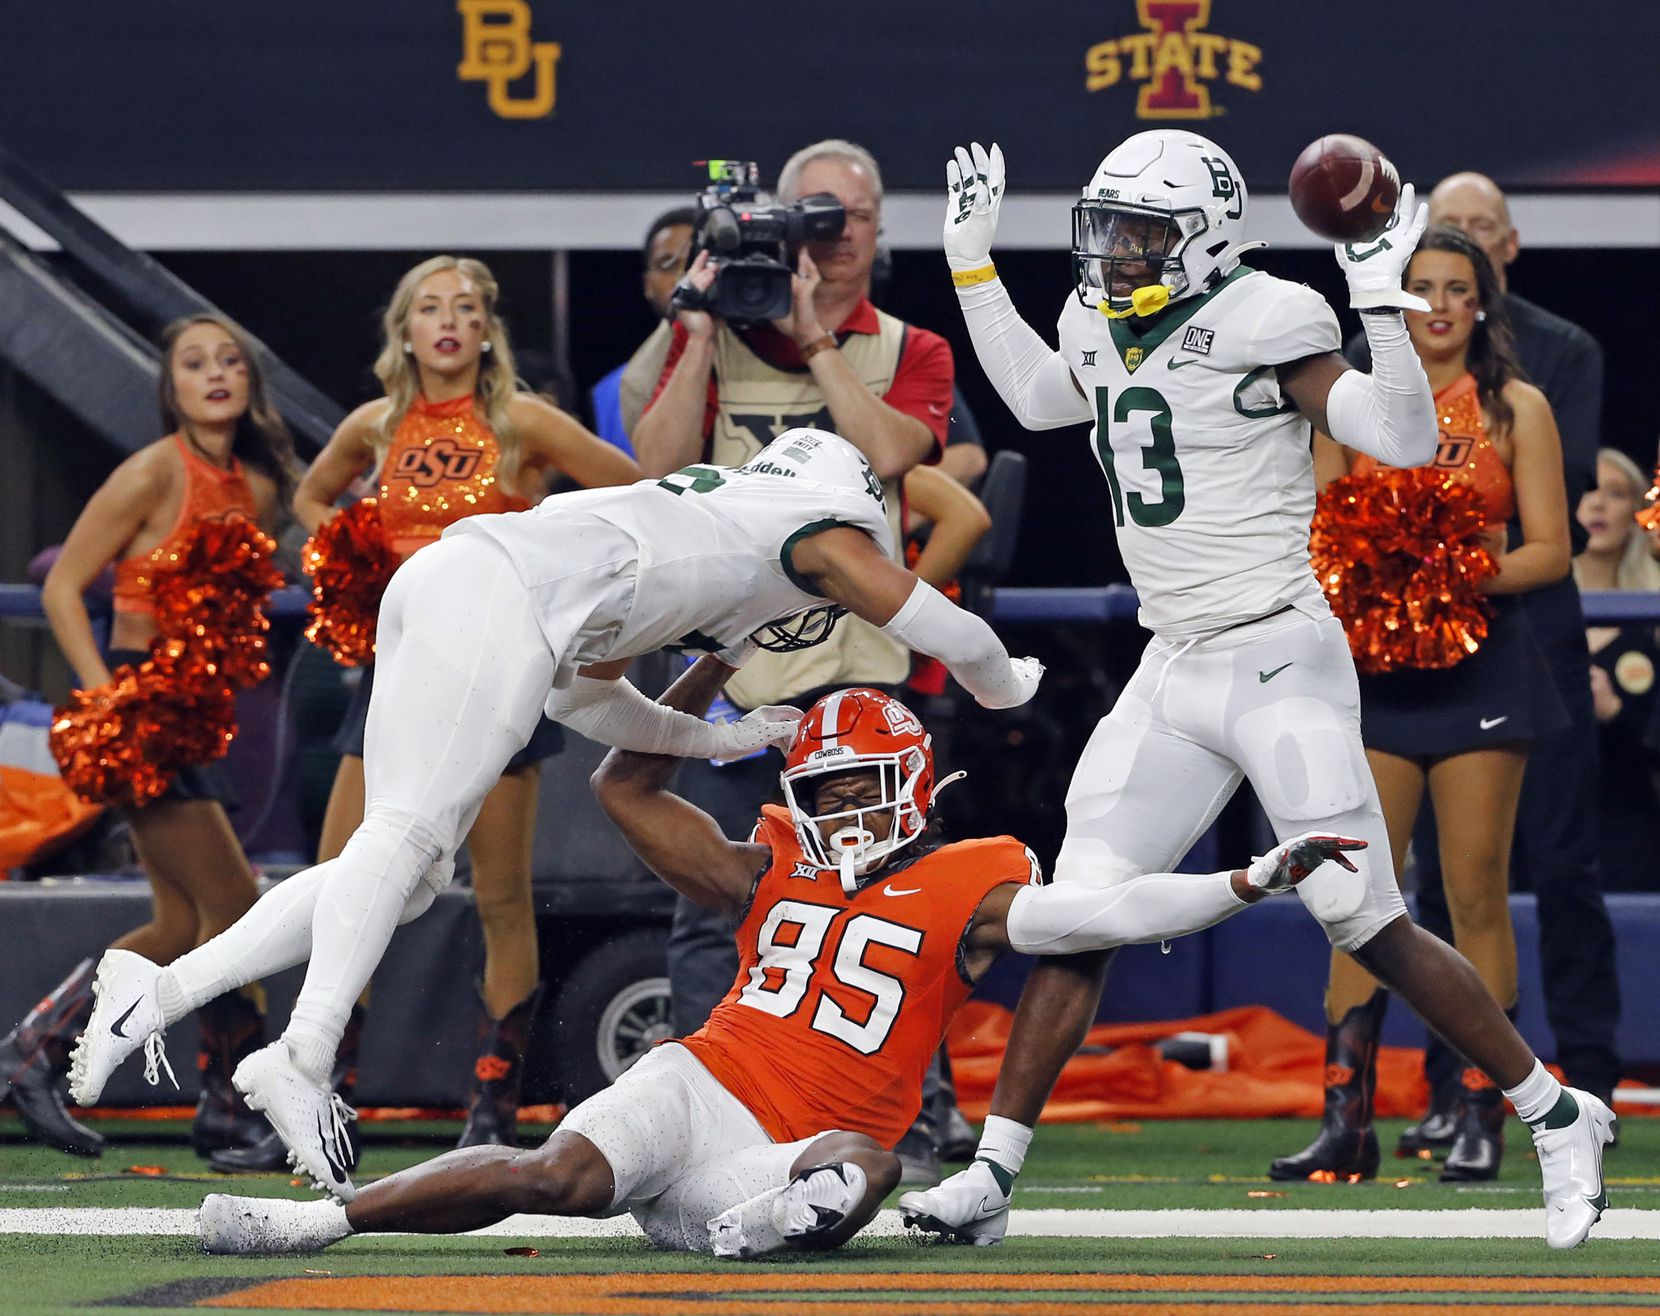 Baylor Bears safety Jalen Pitre (8) and Baylor Bears cornerback Al Walcott (13) manhandle Oklahoma State Cowboys wide receiver Jaden Bray (85) on a pass in the end zone (and were flagged on the play) during the second half of the Big 12 Championship football game at AT&T Stadium in Arlington on Saturday, December 4, 2021. Baylor won 21-16. (John F. Rhodes / Special Contributor)